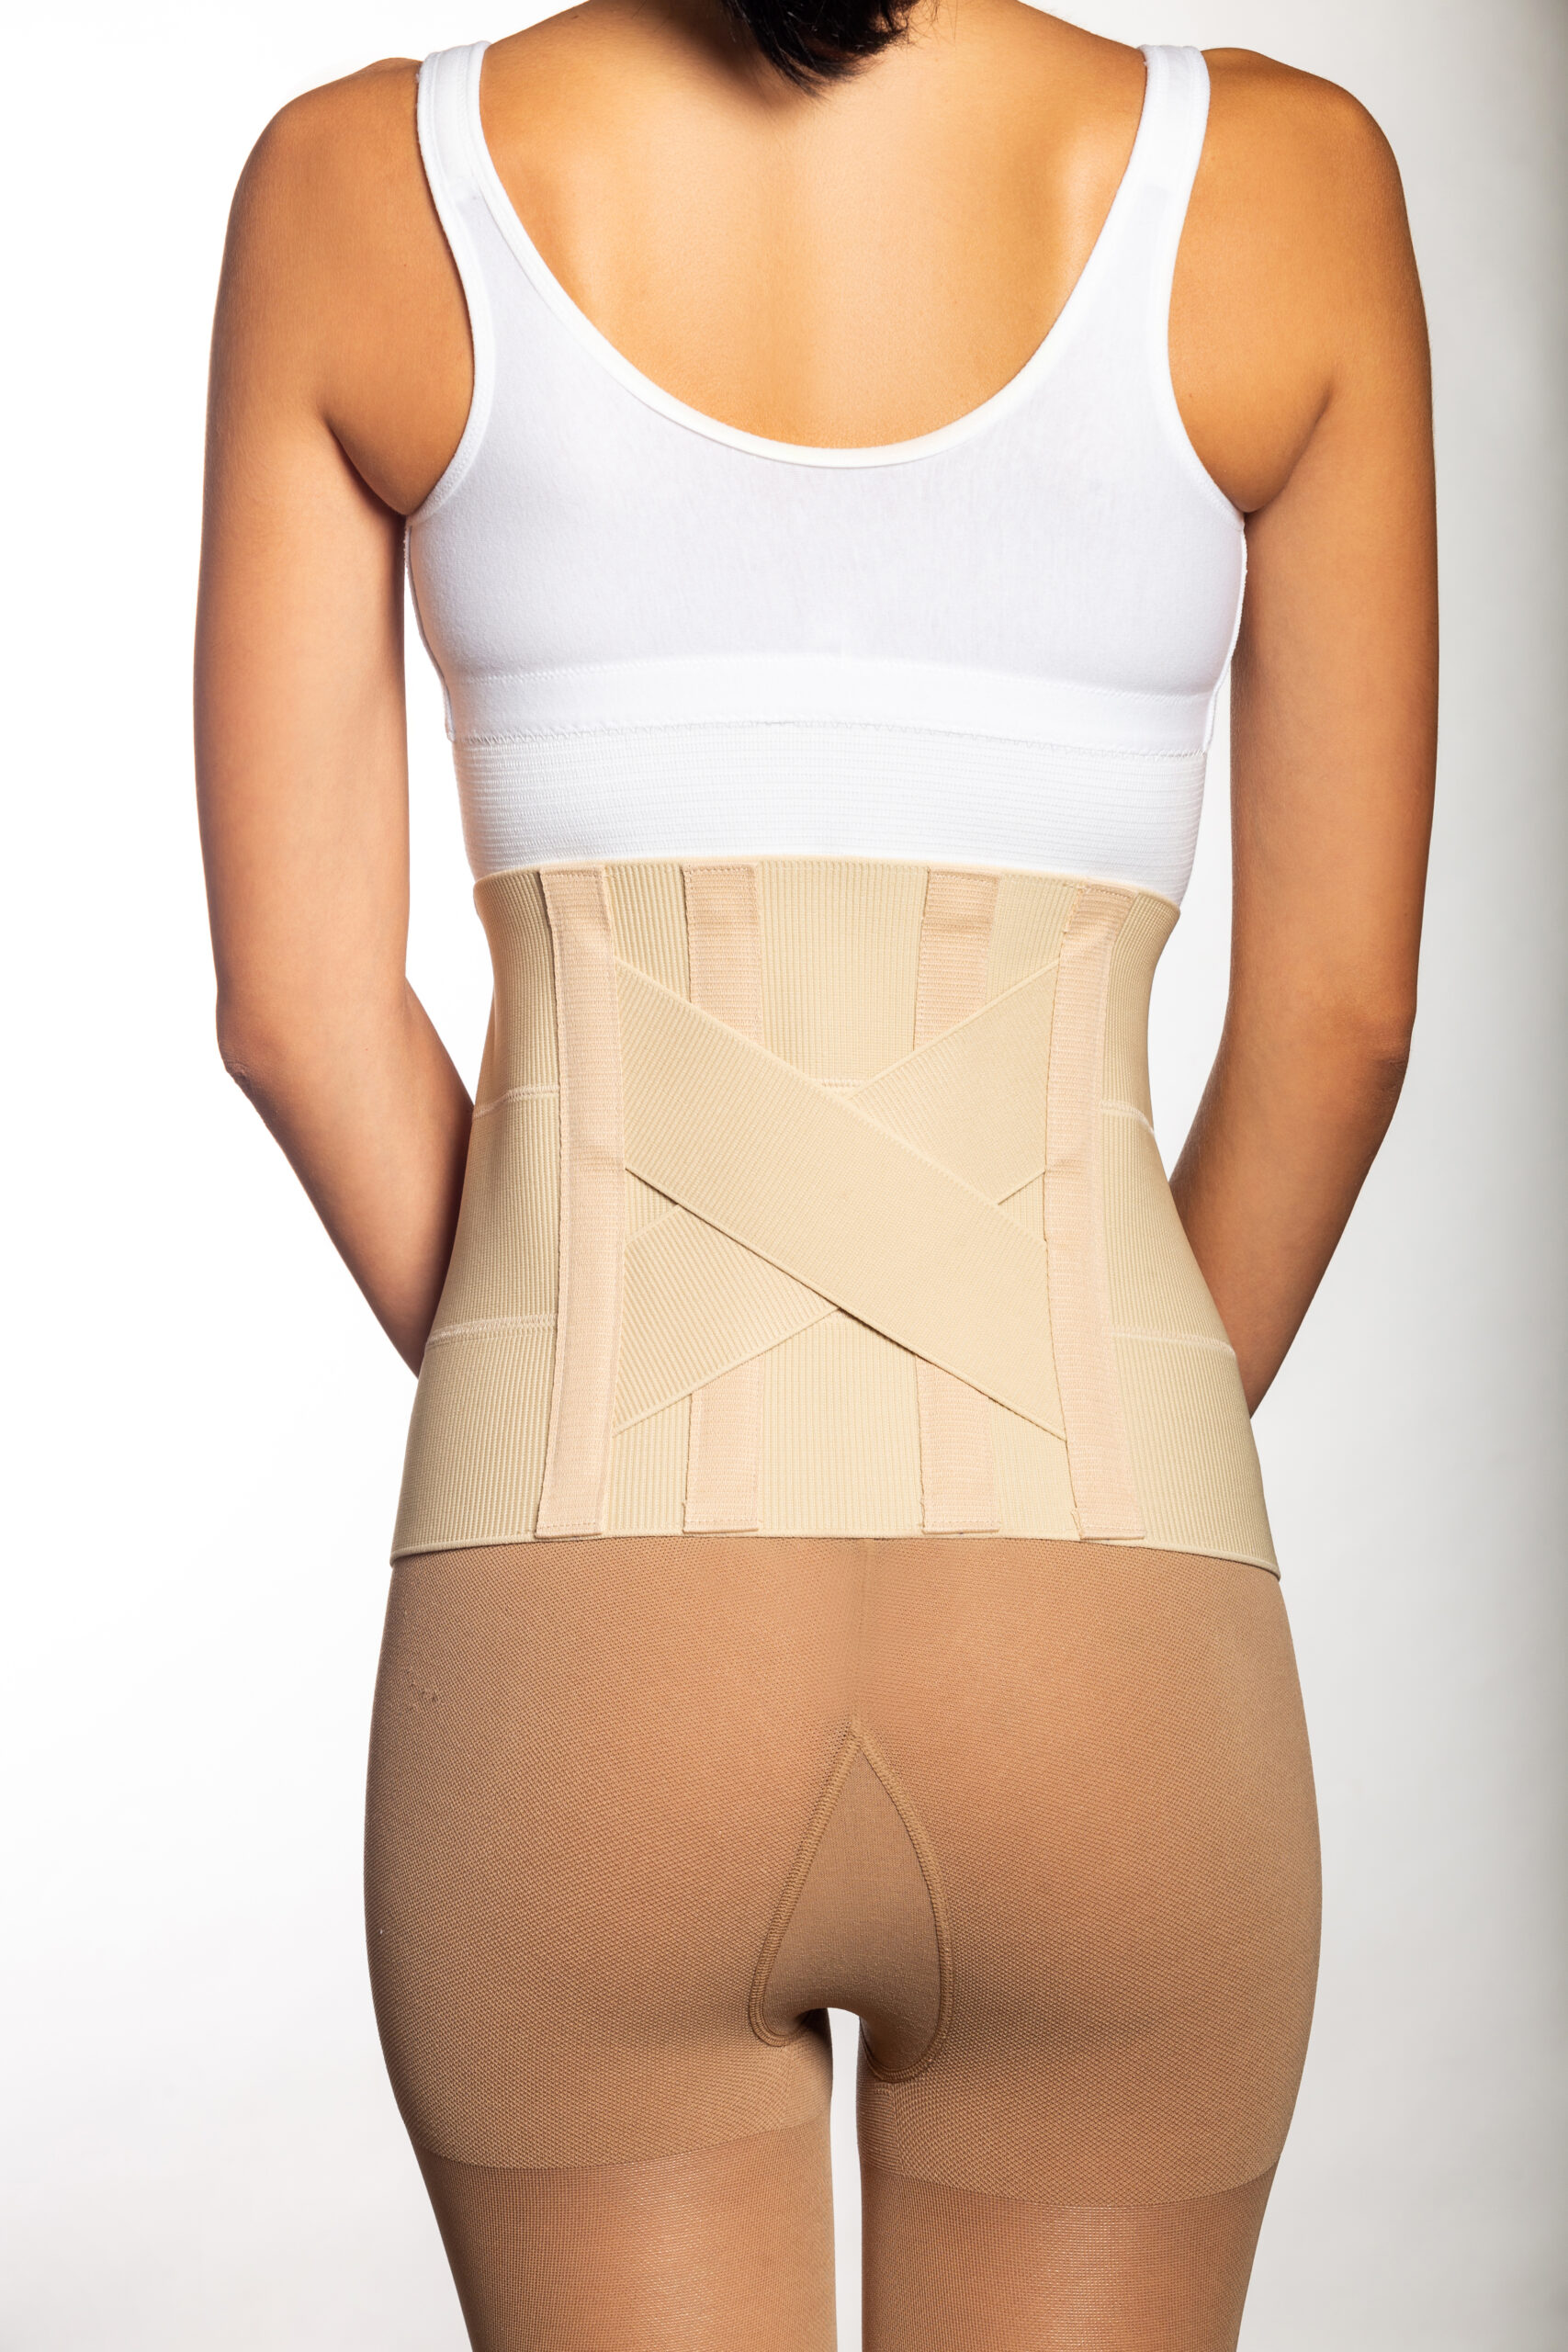 Elastic Lumbar Support W/ Lateral Vertebral Stays Lombostate Afrodite